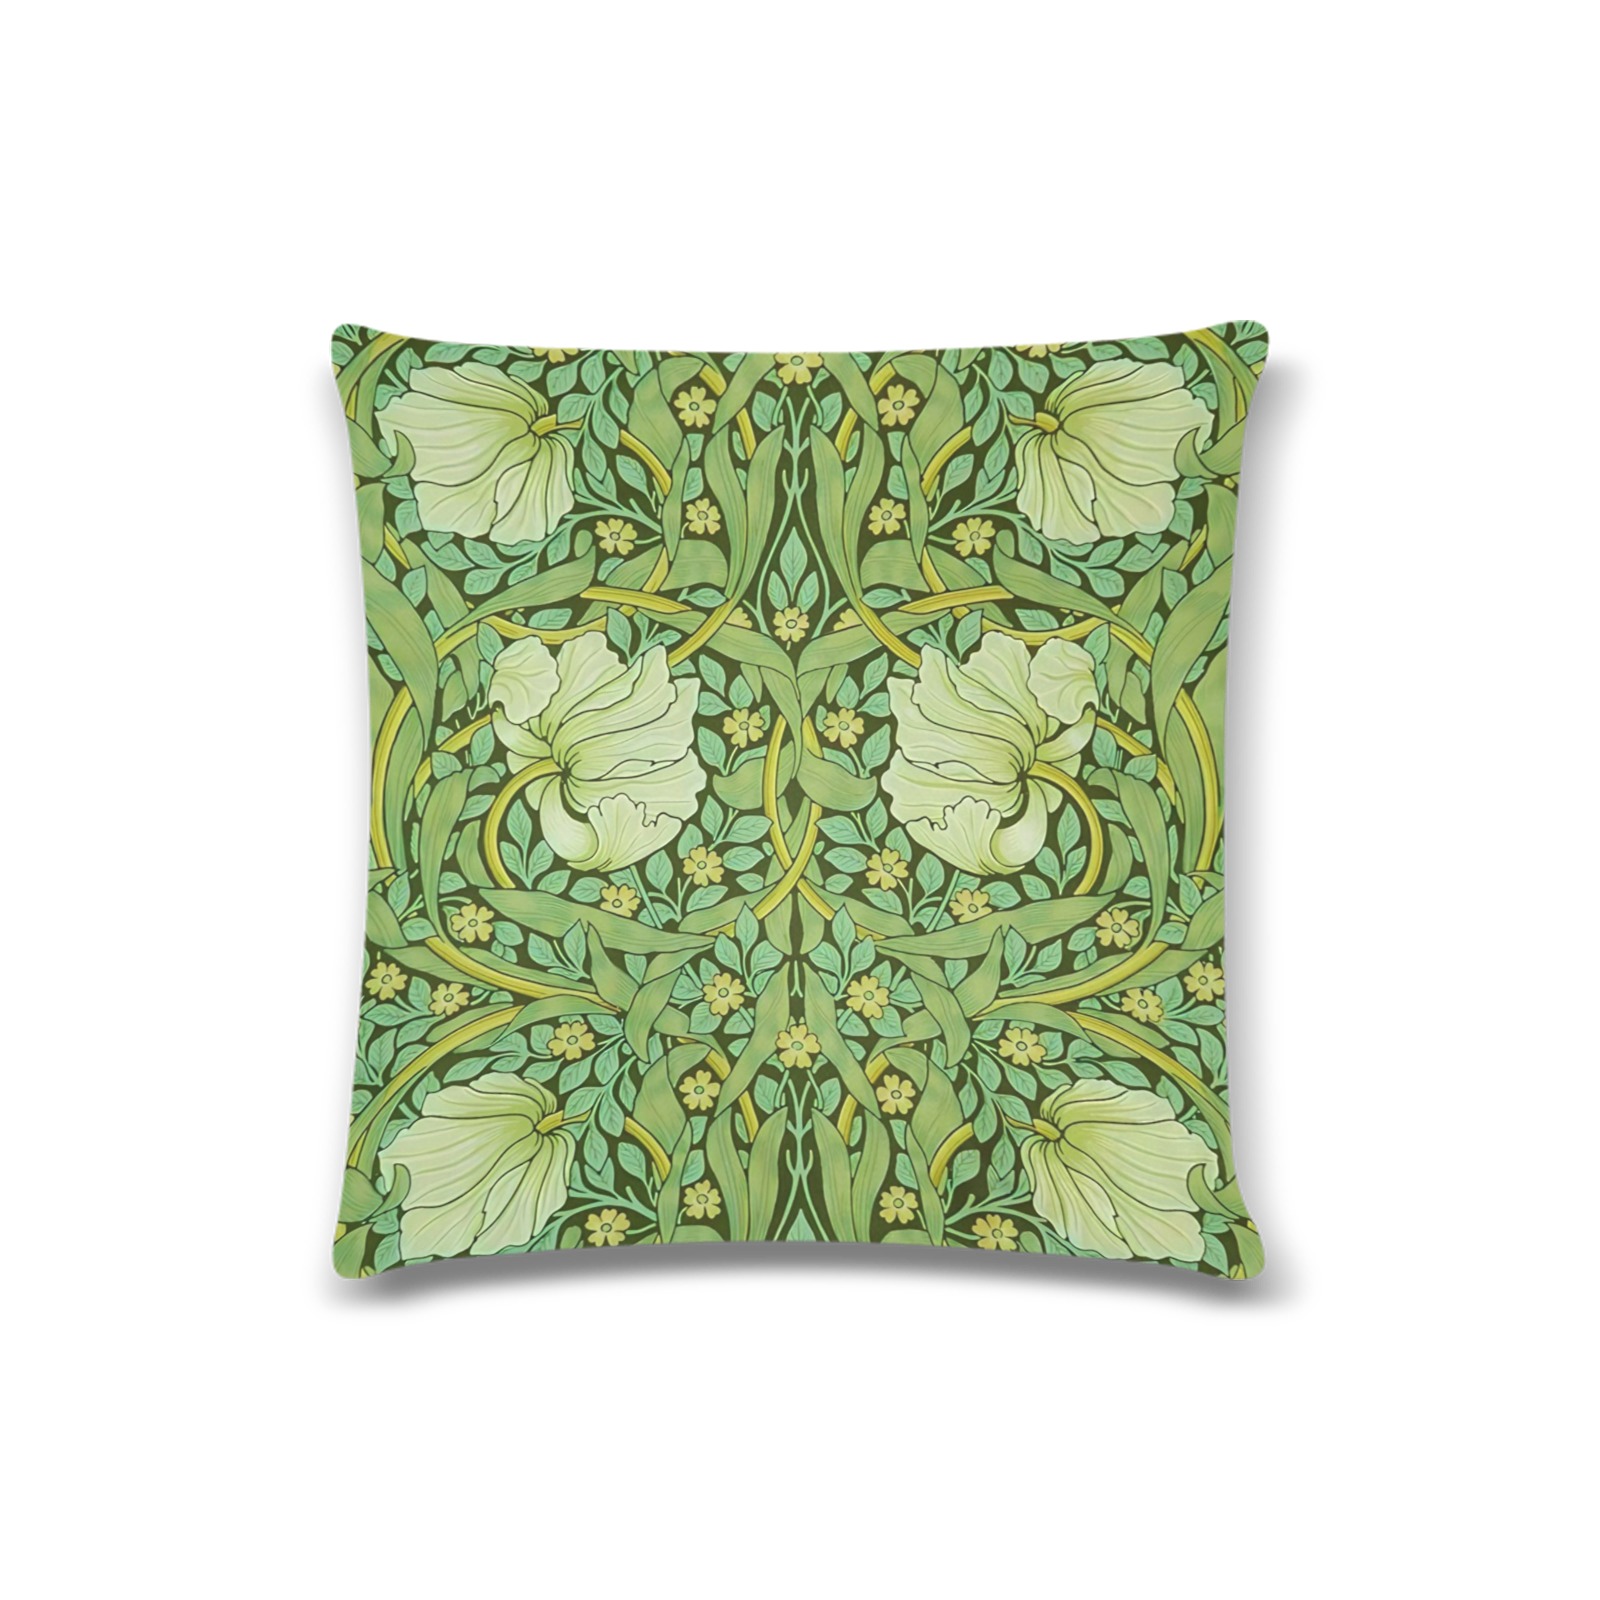 William Morris - Pimpernel Custom Zippered Pillow Case 16"x16"(Twin Sides)